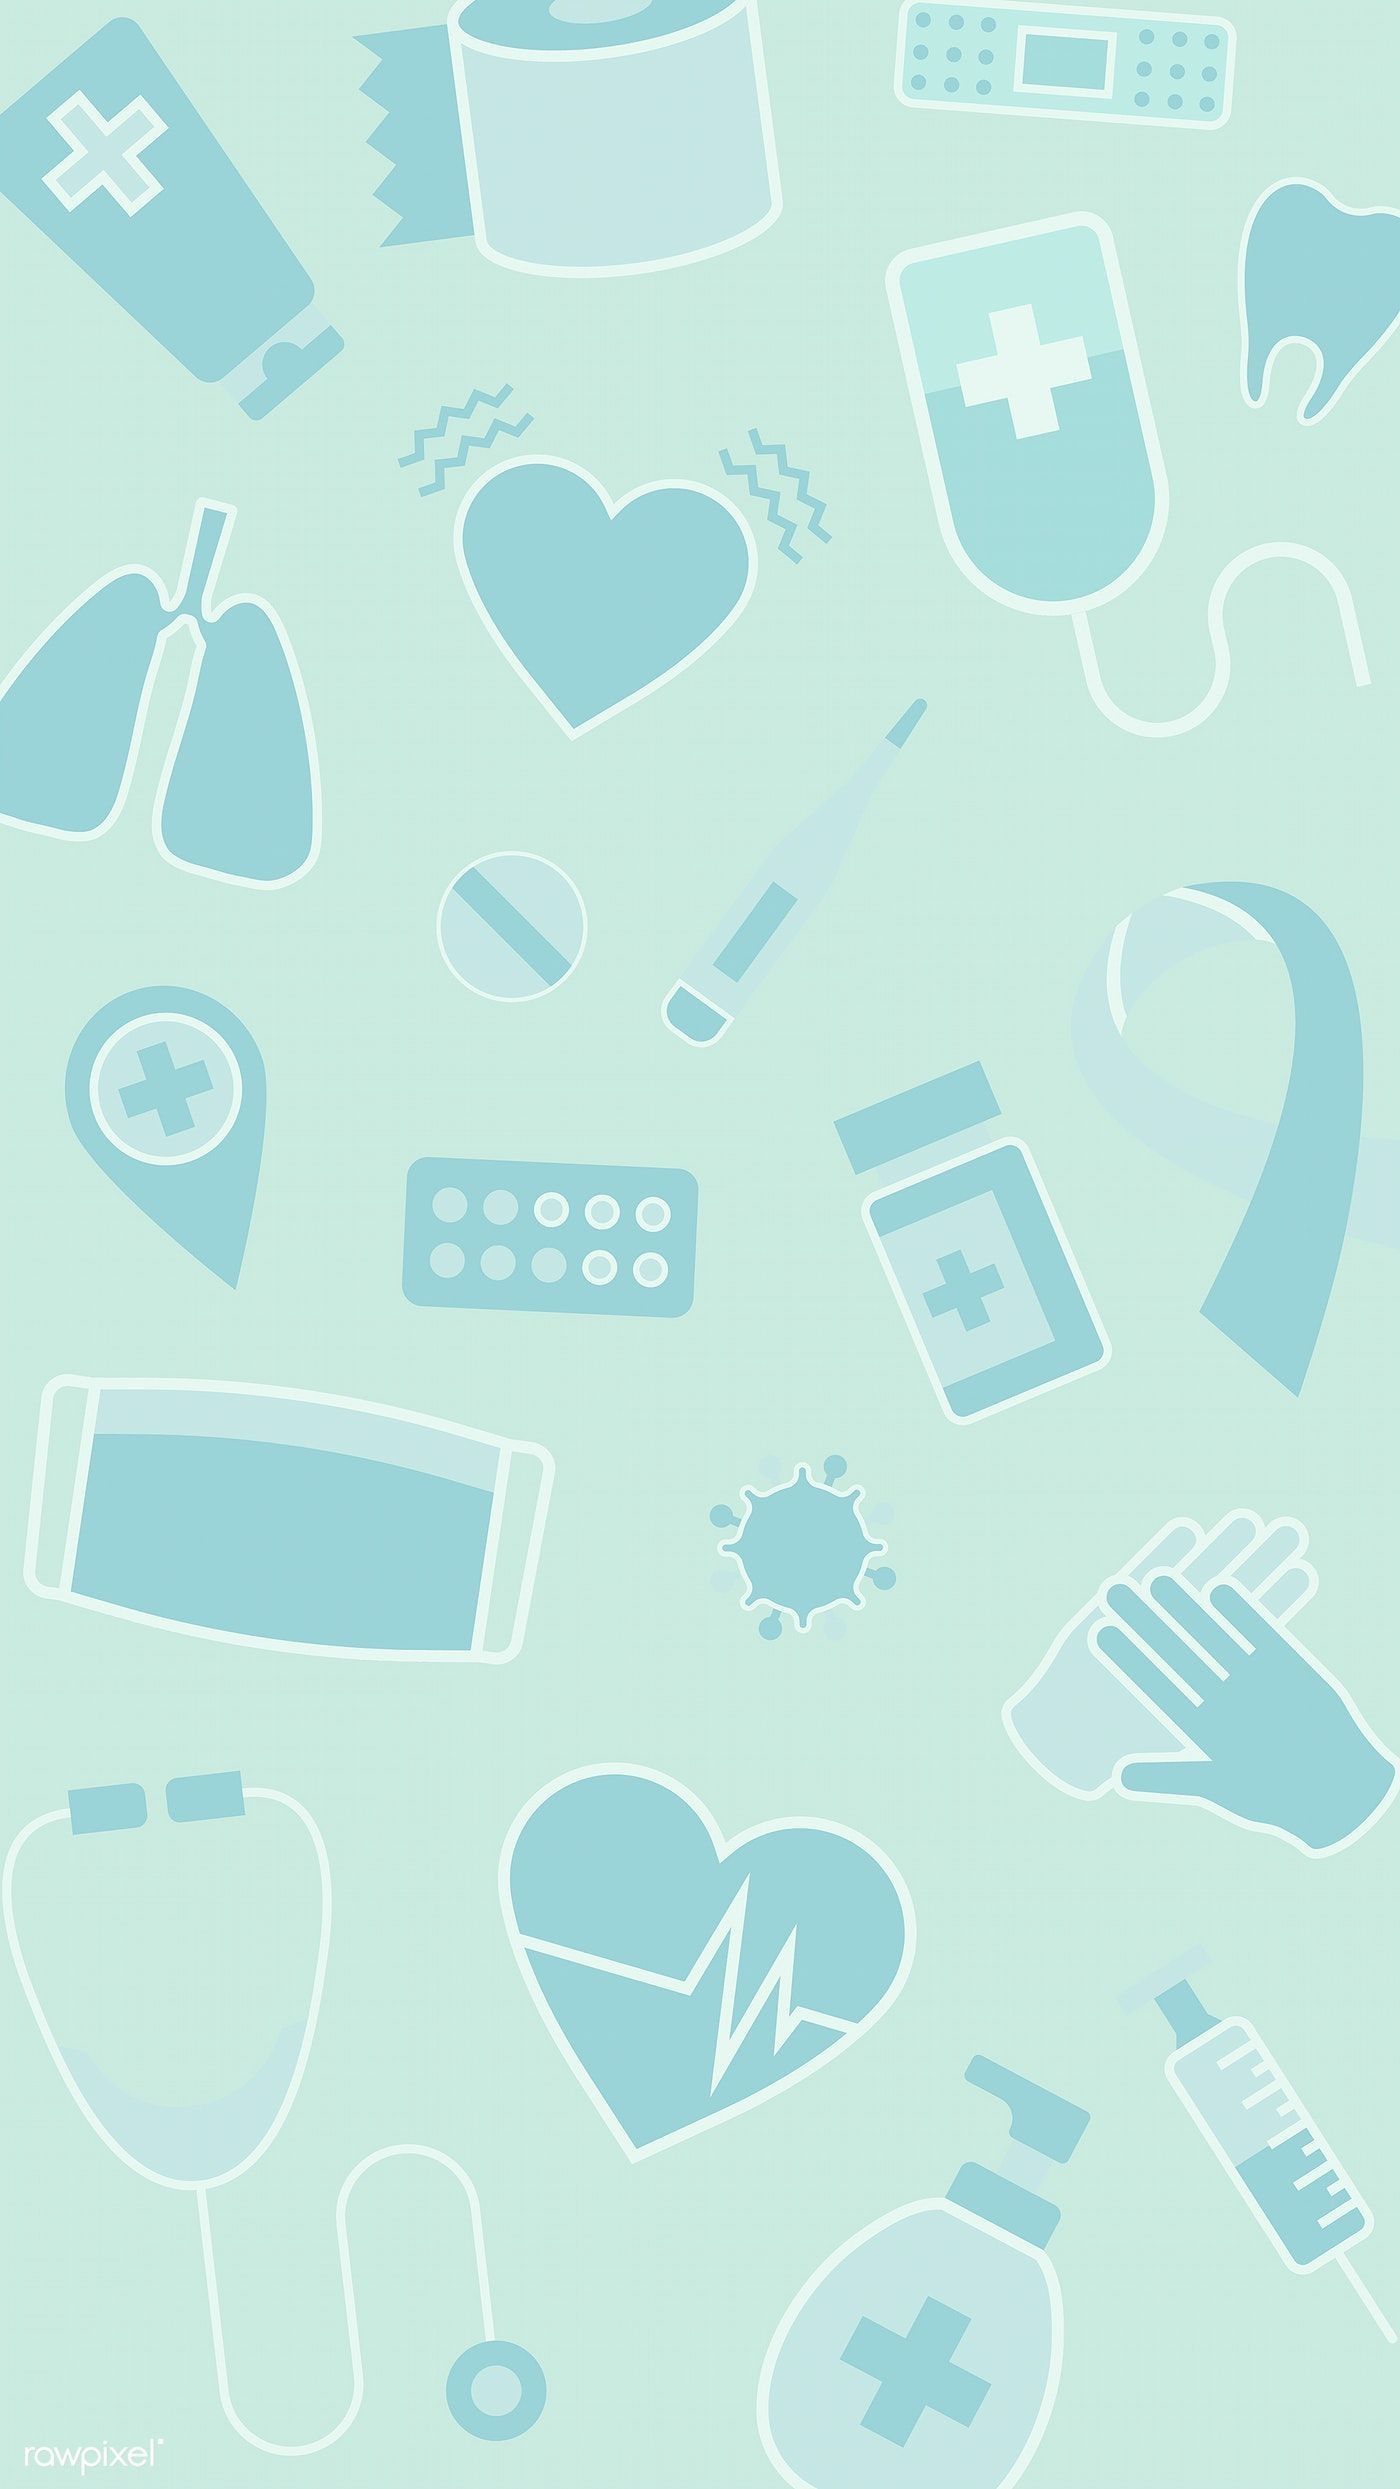 Download premium vector of Medical icons on a blue background - Vector